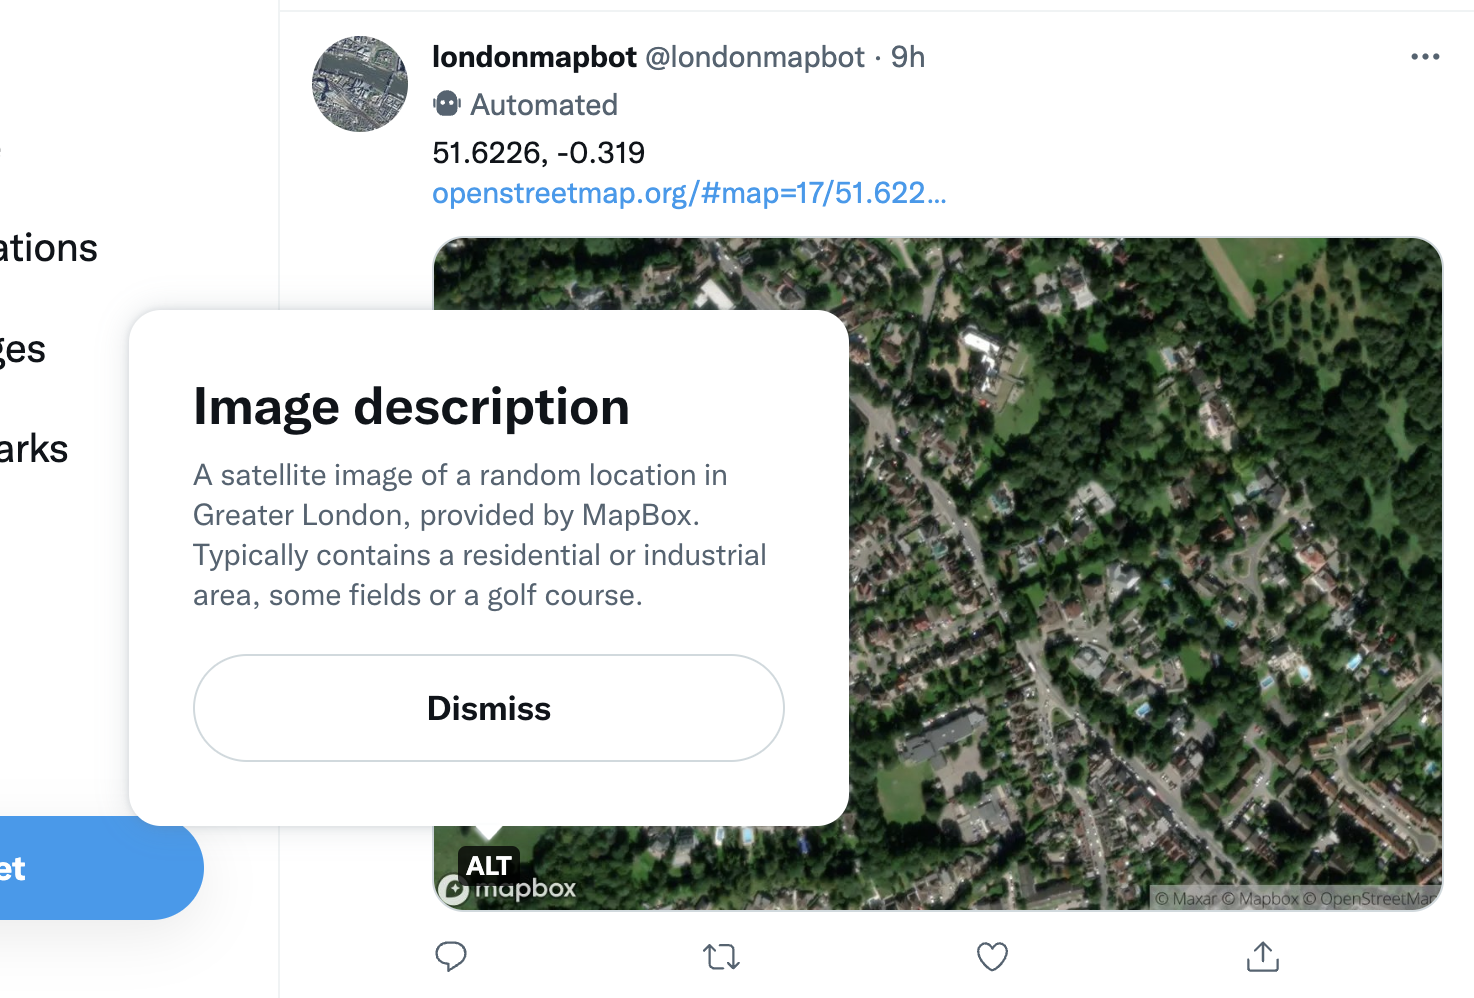 Screenshot of a tweet by the londonmapbot account showing a satellite image of Greater London. The 'alt' button has been clicked, revealing a pop-up with some text that reads 'A satellite image of a random location in Greater London, provided by MapBox. Typically contains a residential or industrial area, some fields or a golf course'.